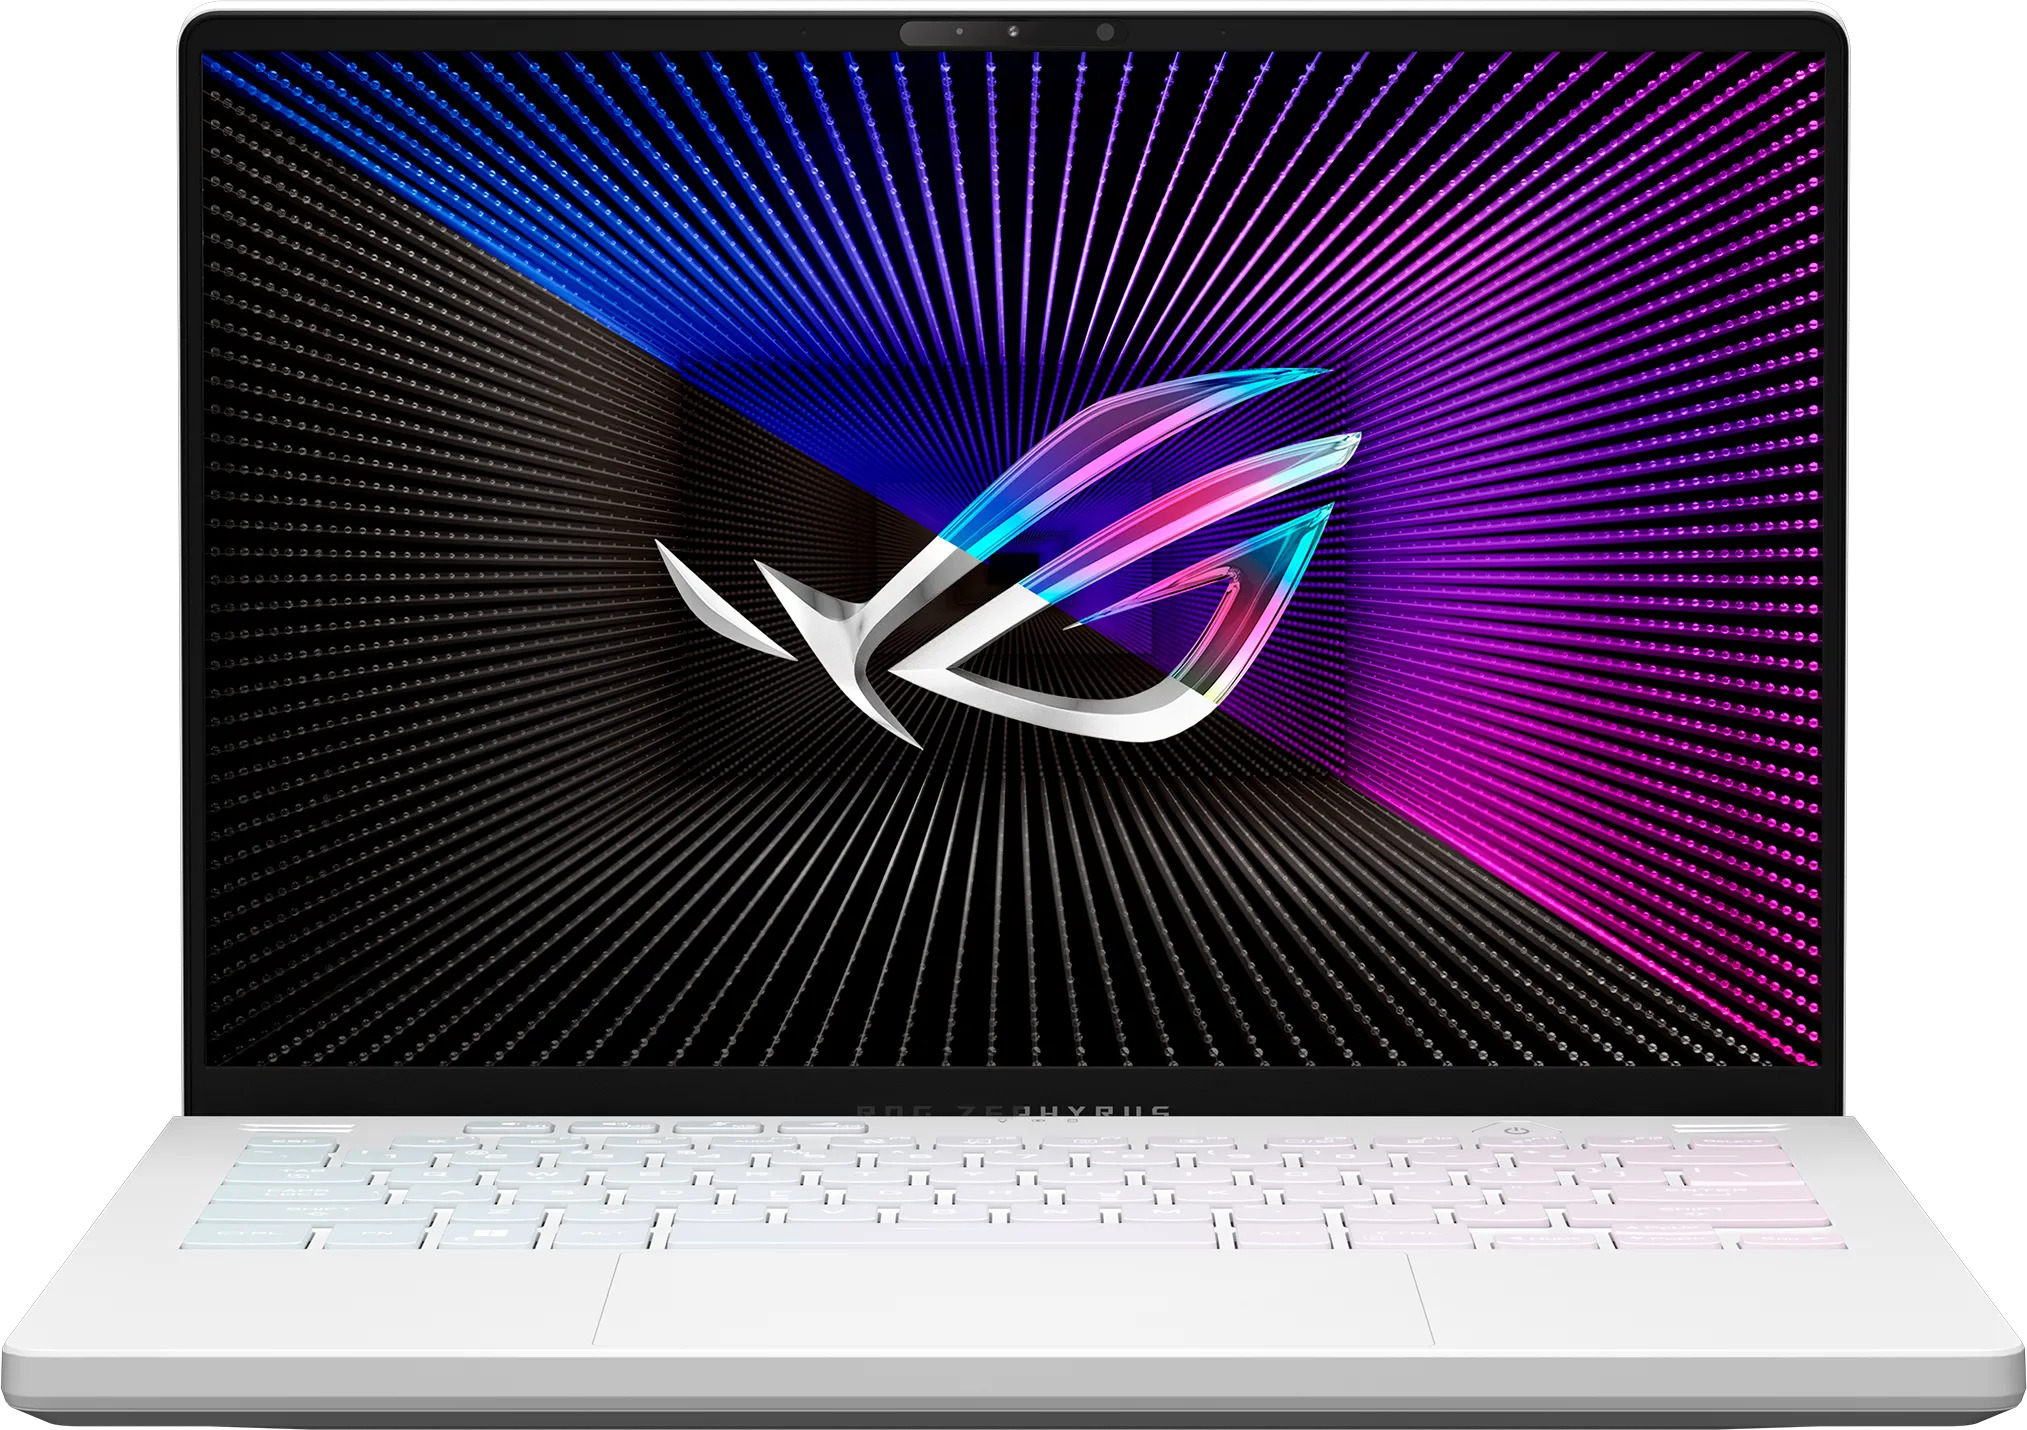 Asus ray zephyrus g14